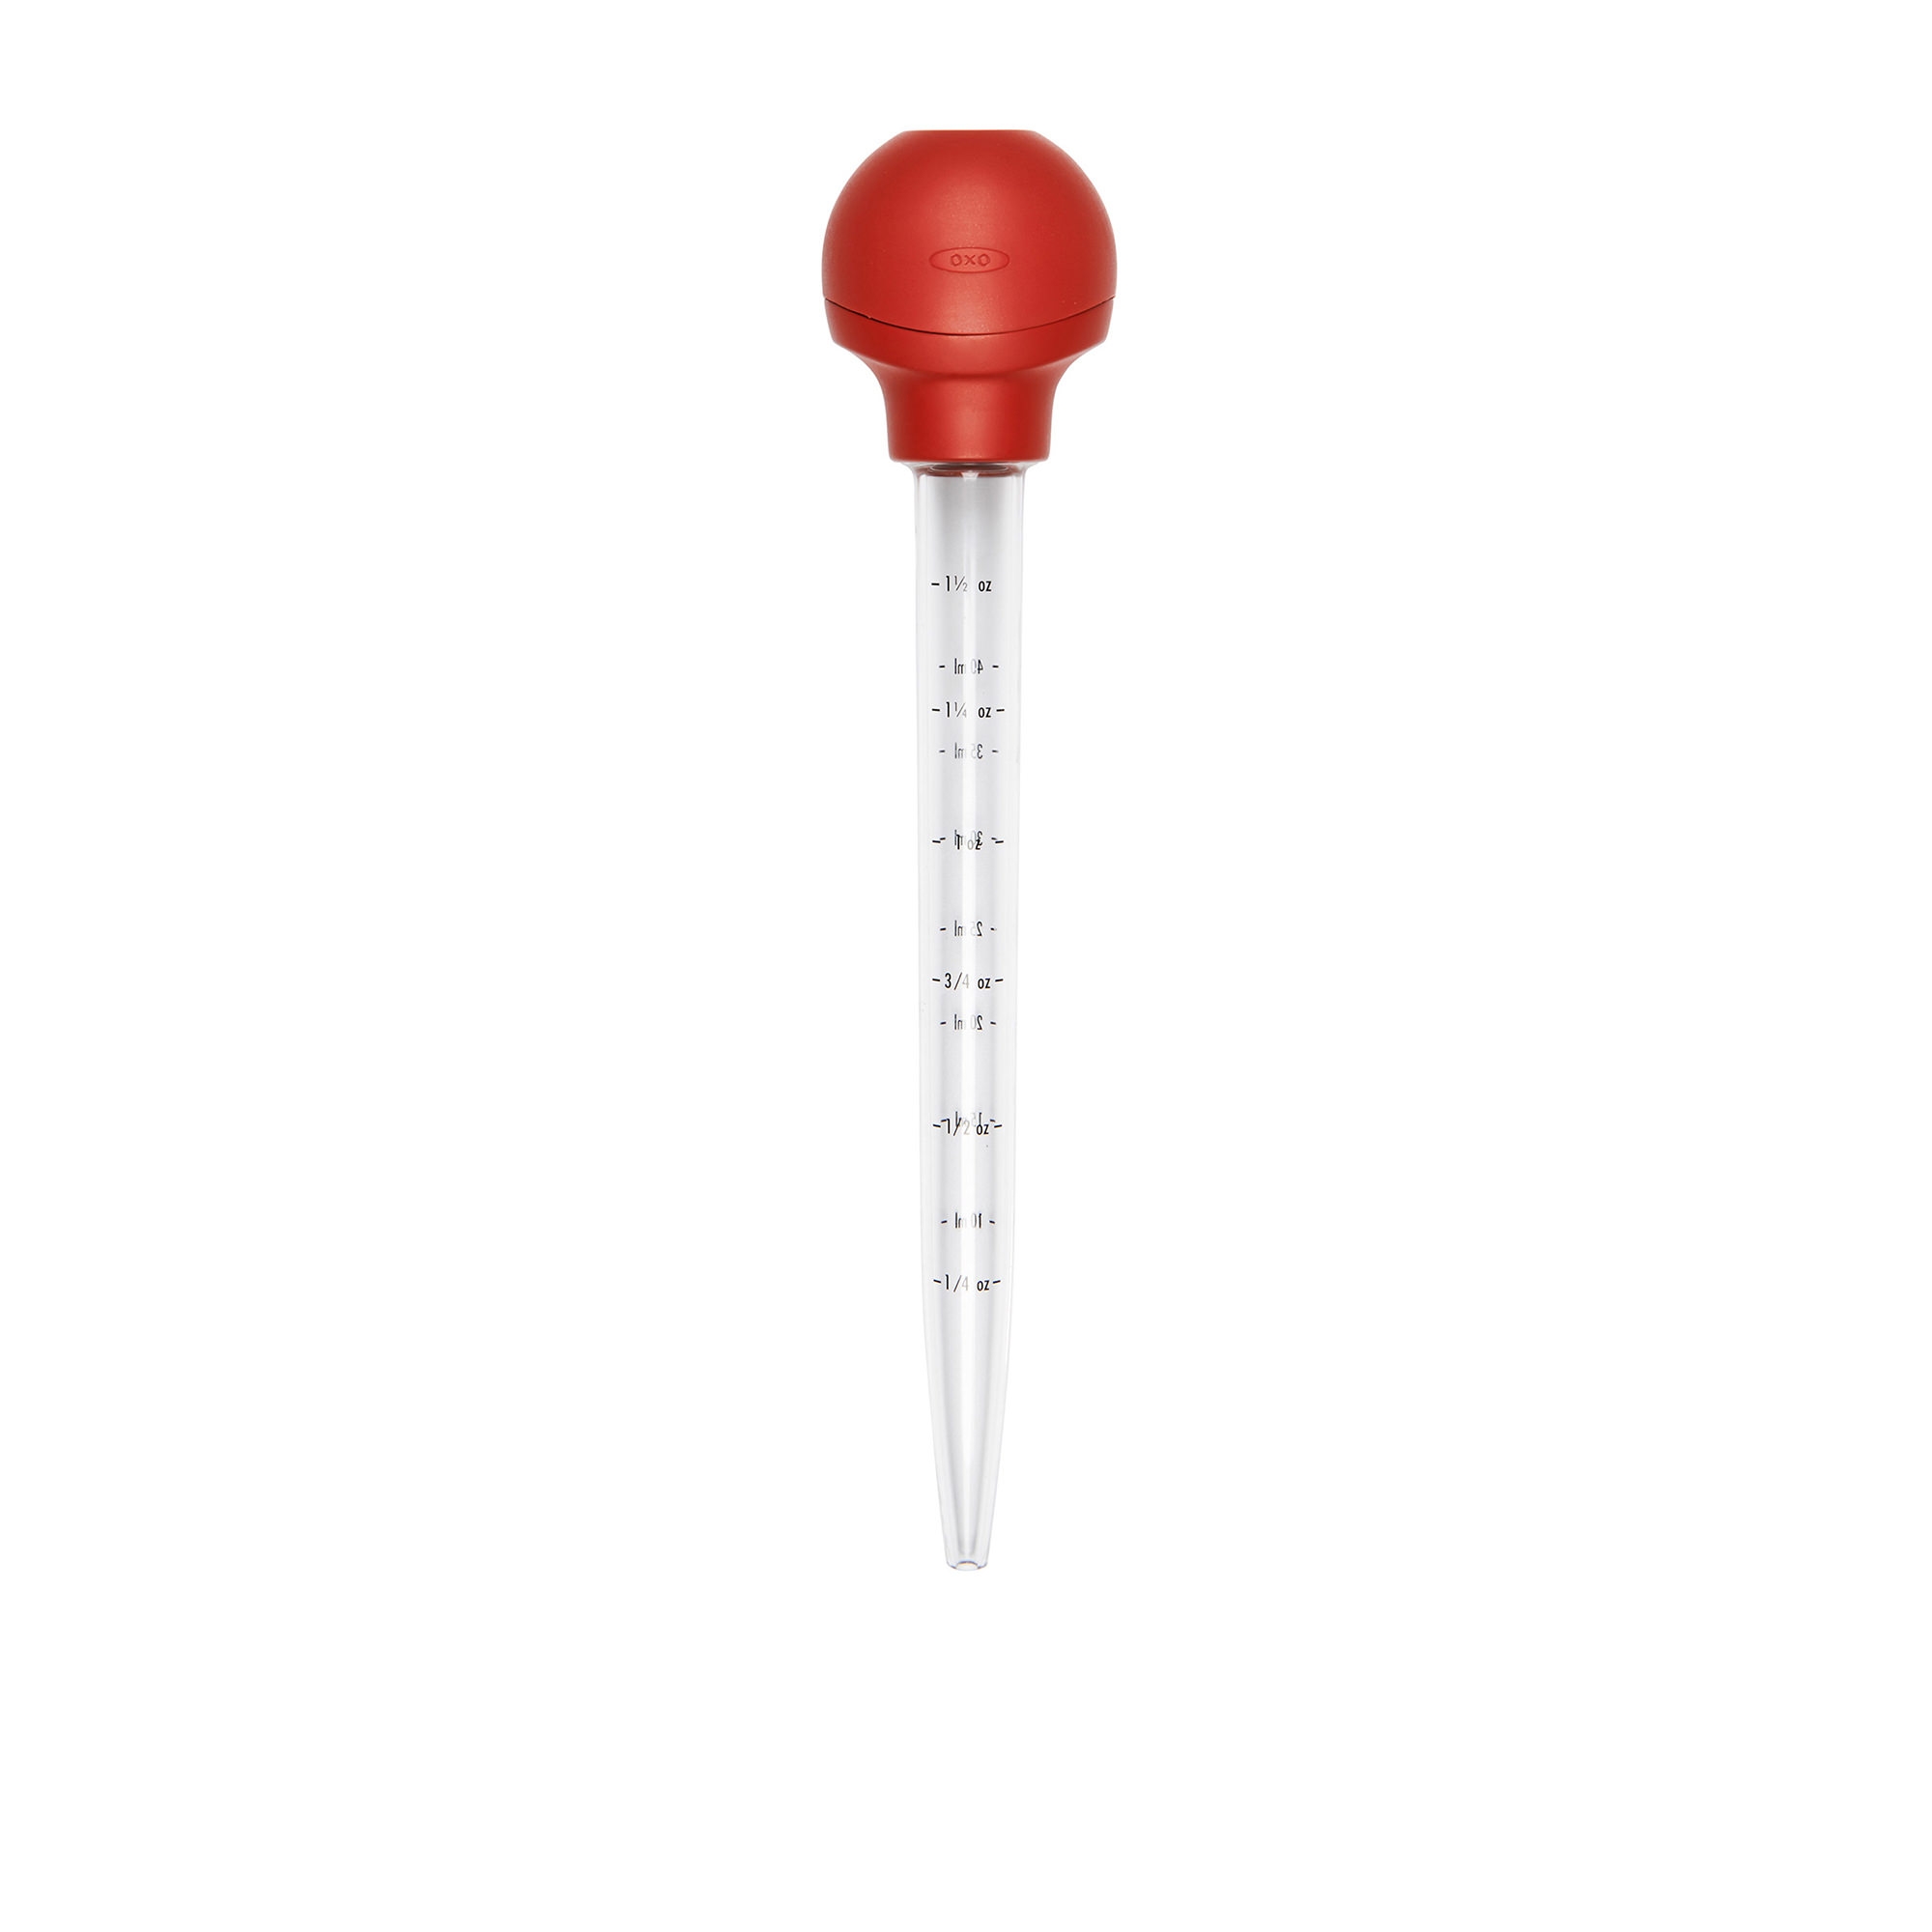 OXO Good Grips Baster with Cleaning Brush Image 2